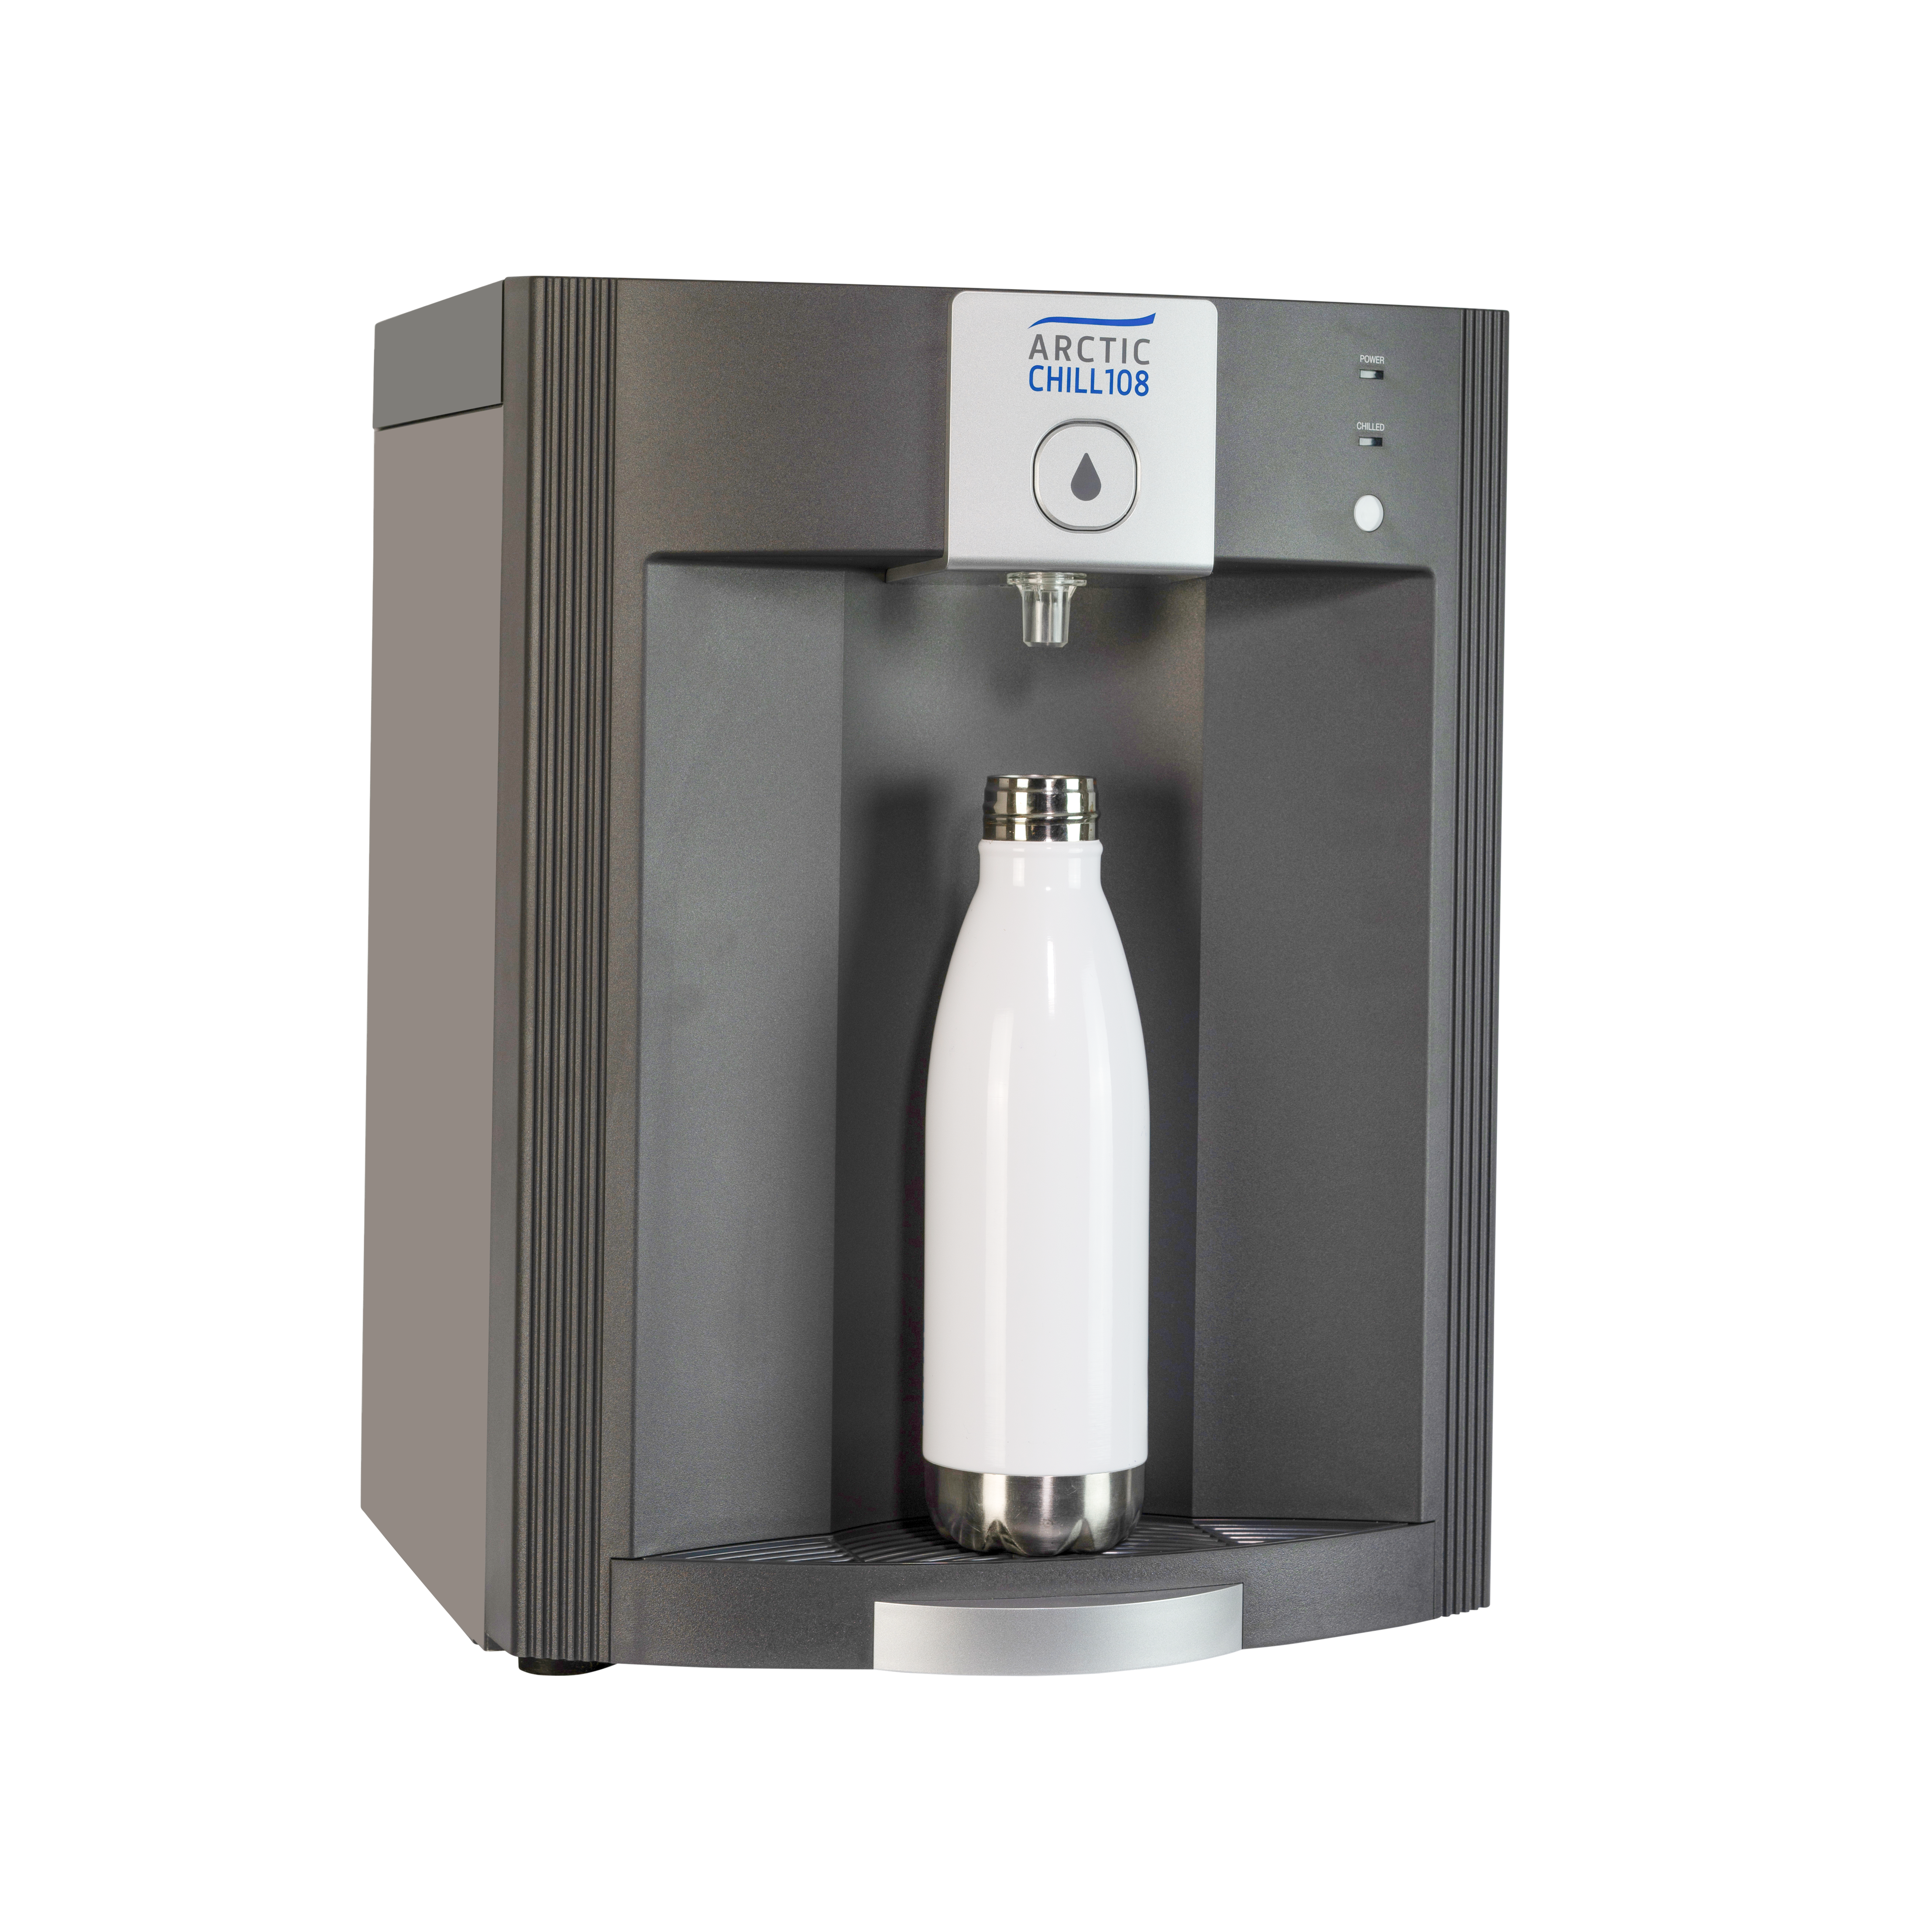 Arctic Chill 108 tabletop water cooler